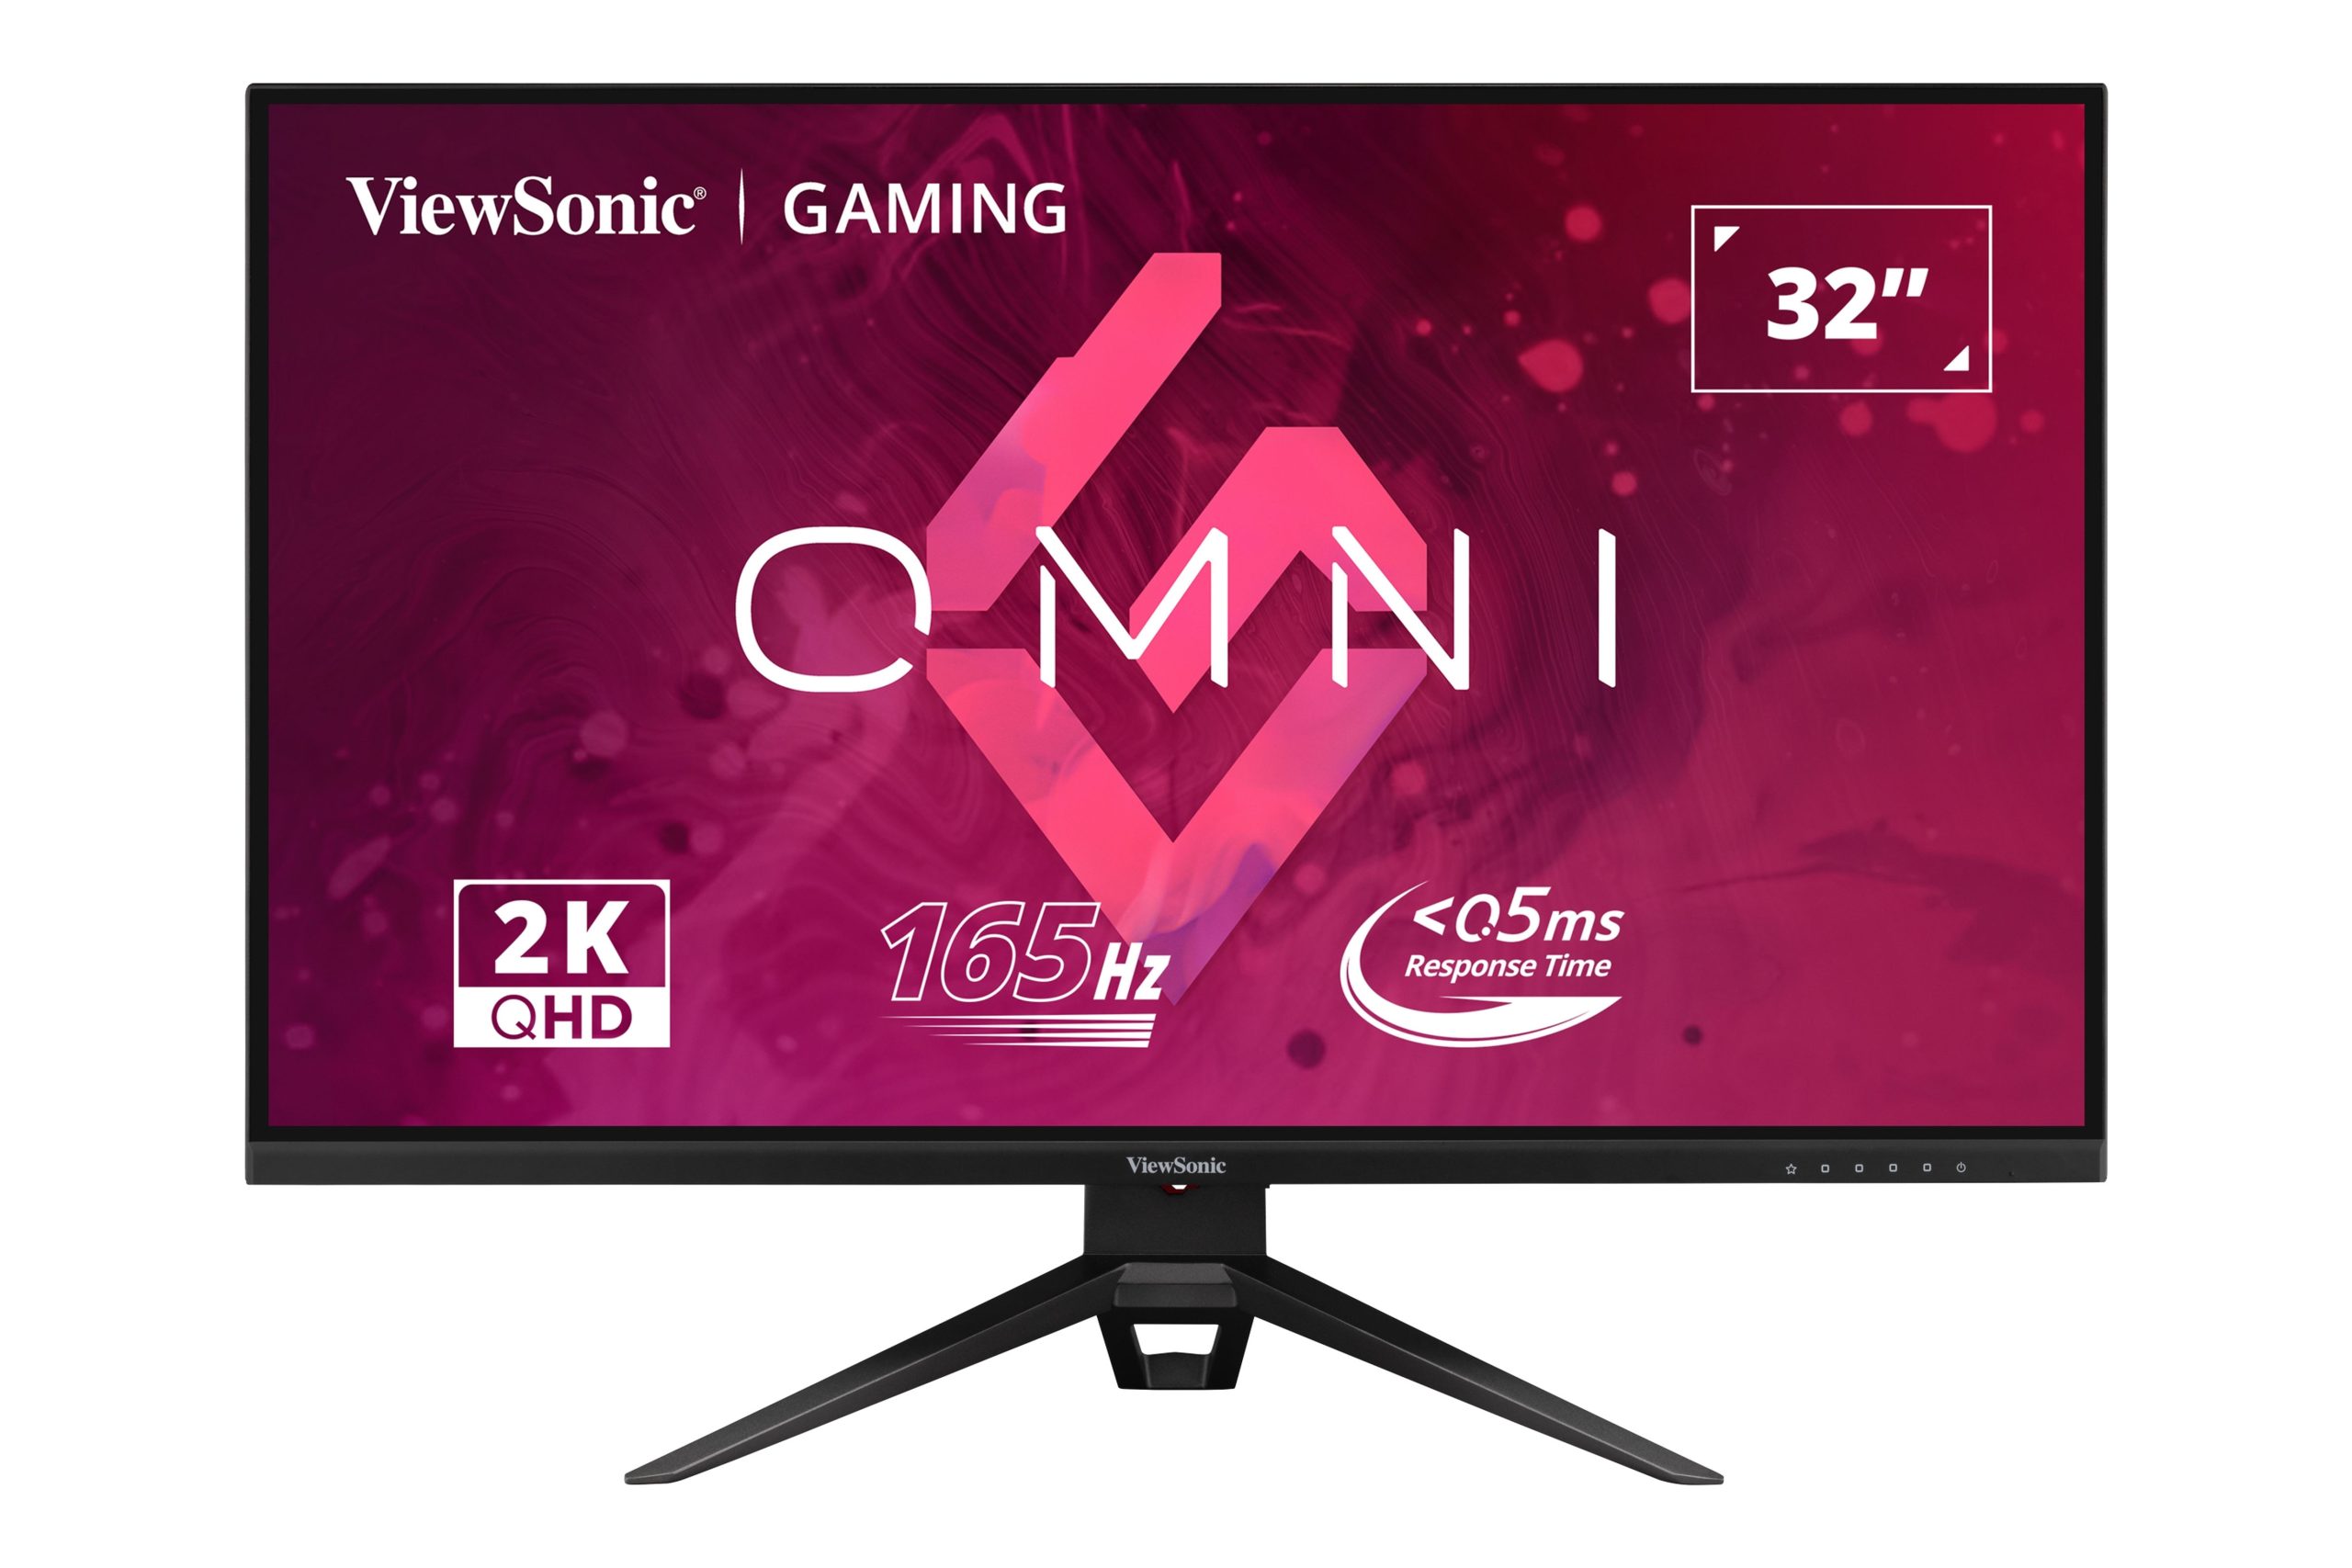 ViewSonic Launched Monitors for Casual and Hardcore Gamers